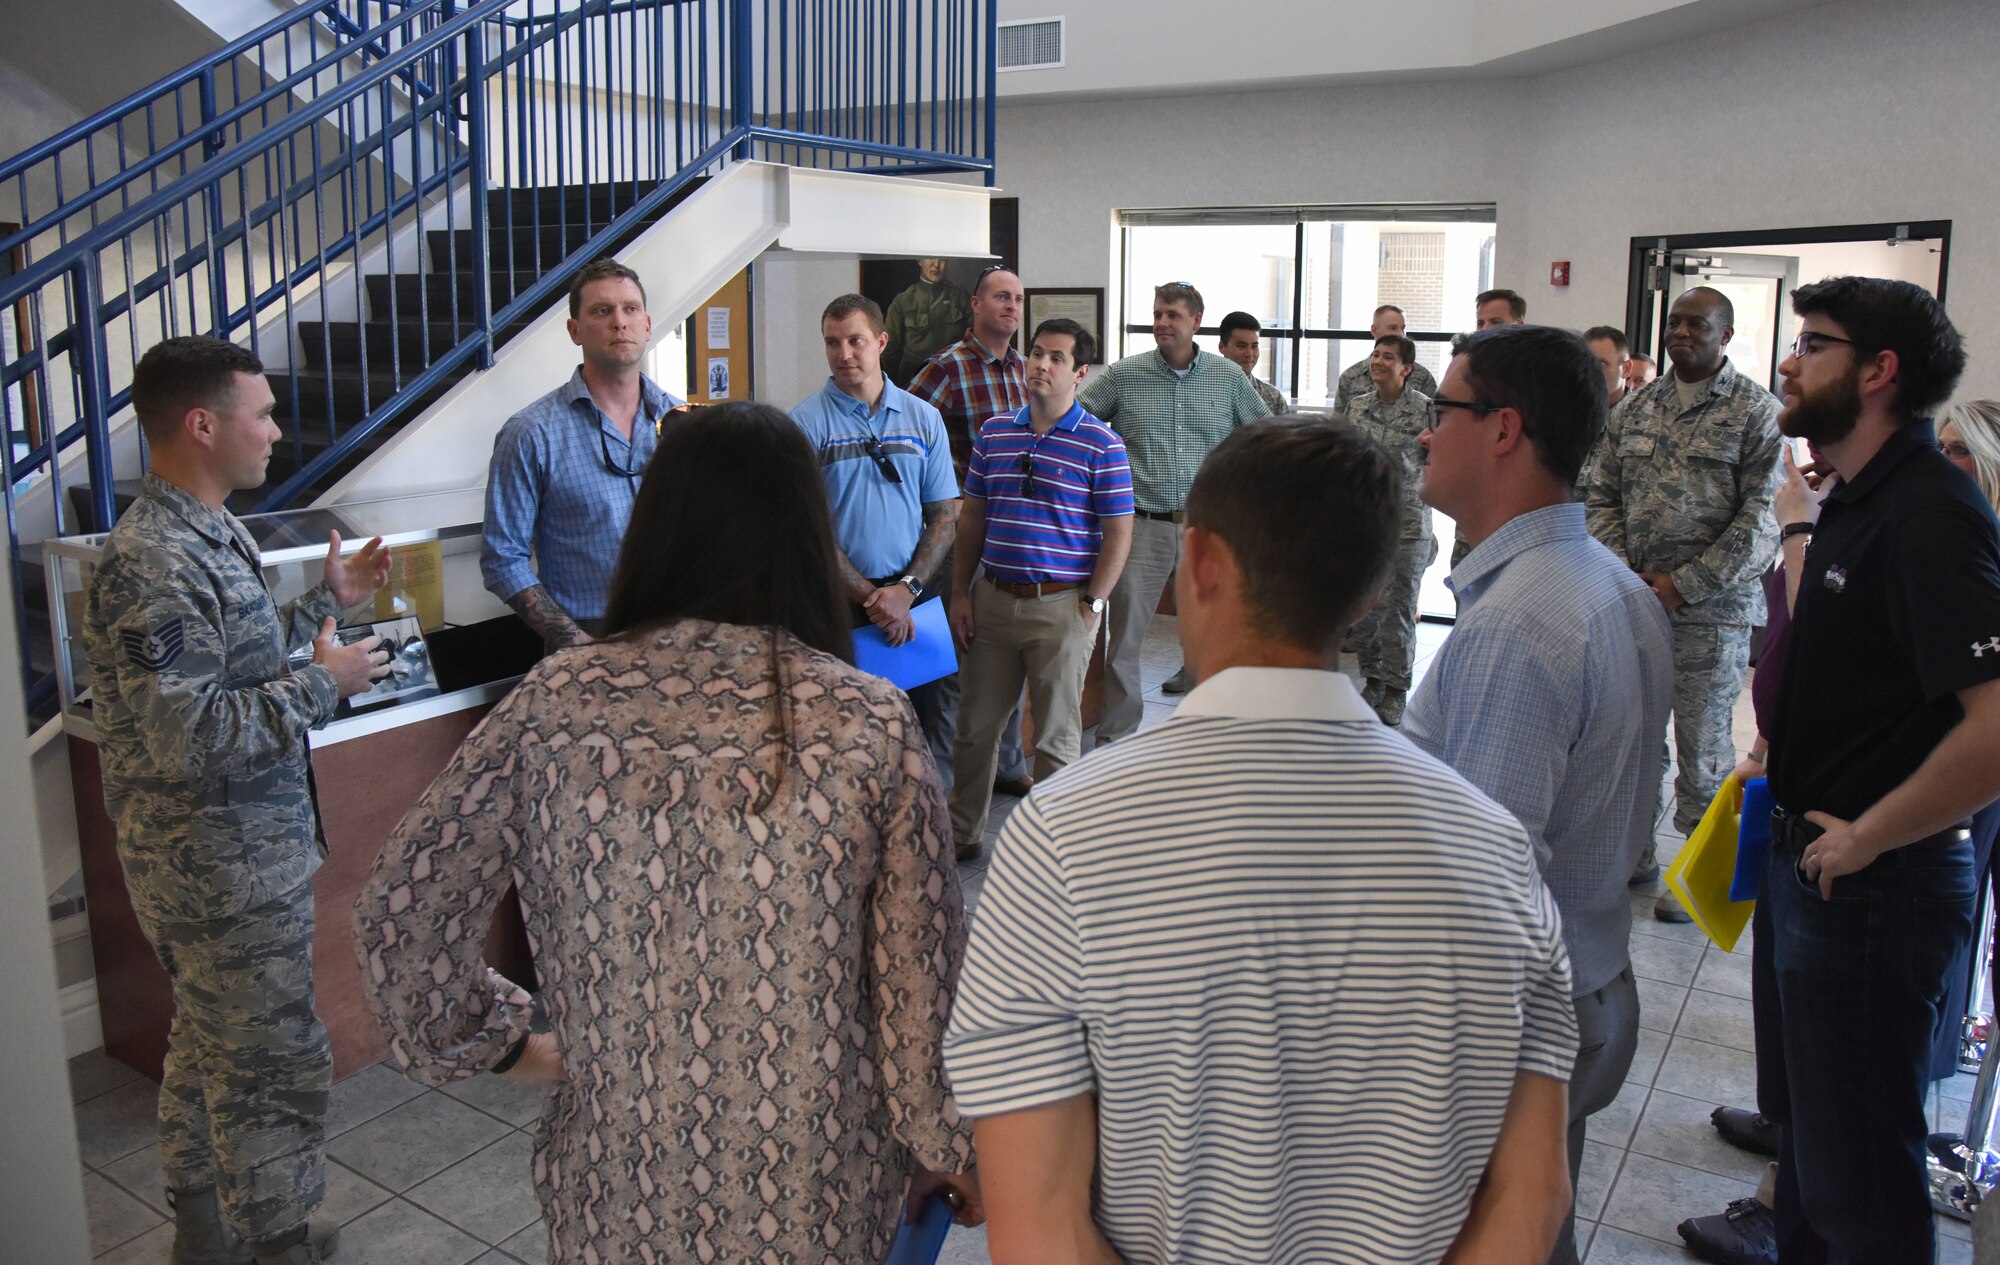 U.S. Air Force Tech. Sgt. Zachary Bartlett, 81st Training Group military training leader, briefs congressional staffers on the Levitow Training Support Facility functions used by the Airmen in the 81st TRG on Keesler Air Force Base, Mississippi, Aug. 6, 2018. The staffers visited Keesler from the offices of Senators Roger Wicker and Cindy Hyde-Smith and Congressman Trent Kelly to receive an overview of the 81st Training Wing to identify areas which could use congressional support. (U.S. Air Force photo by Kemberly Groue)